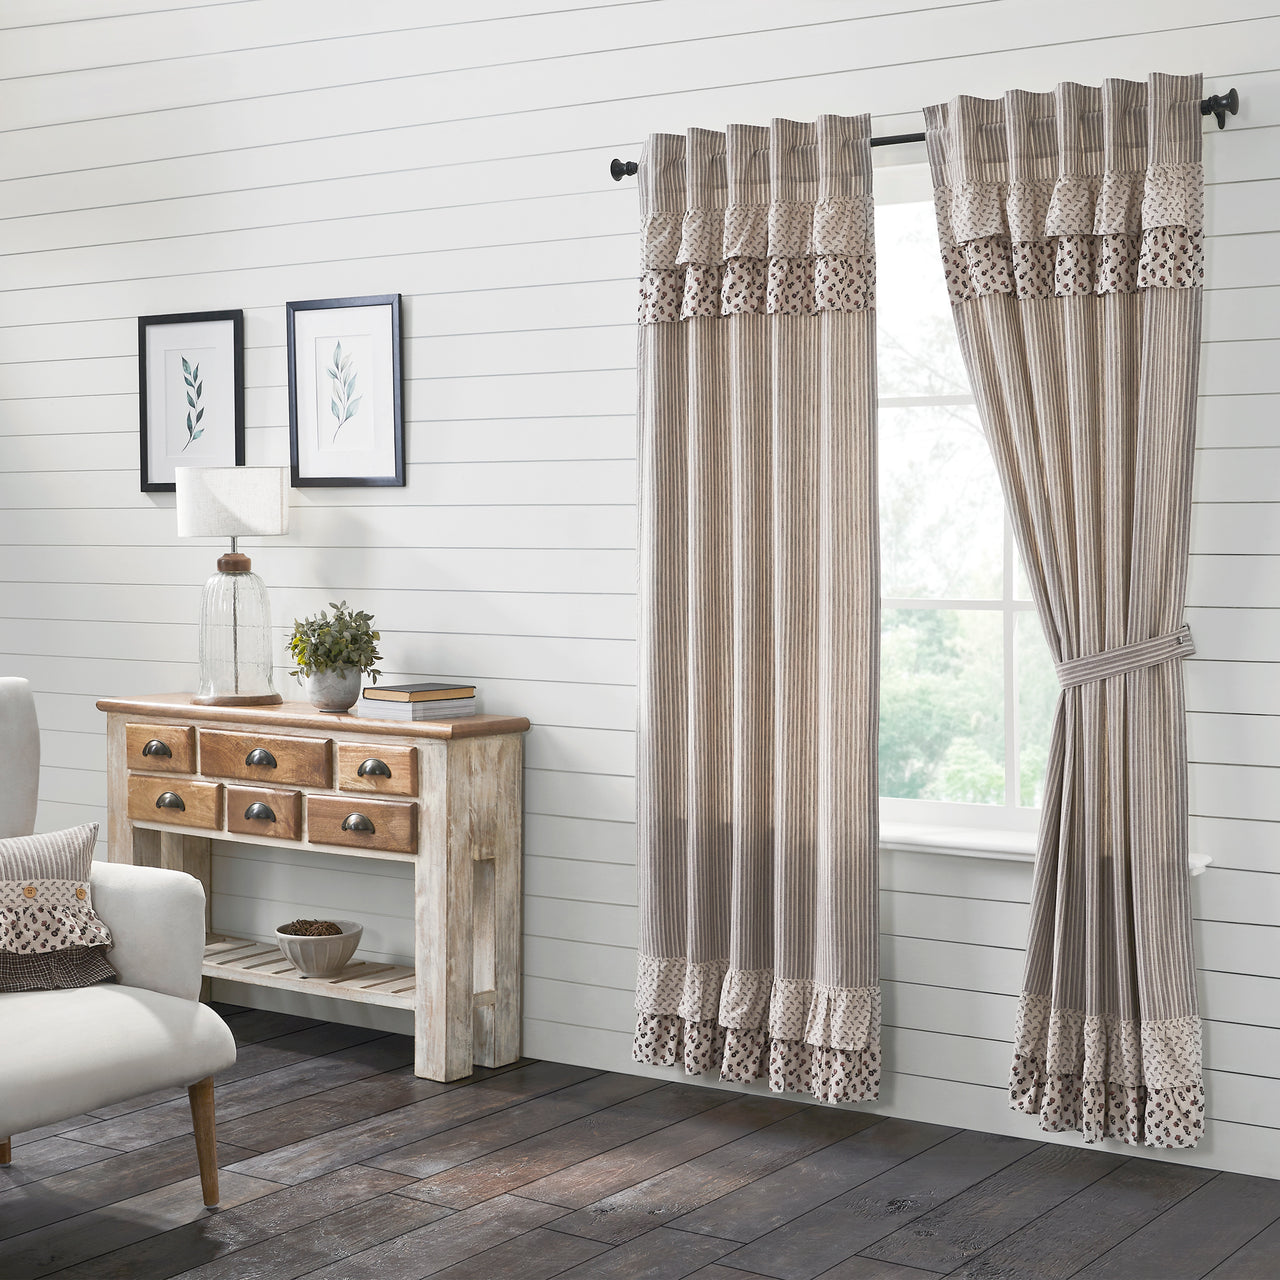 Florette Ruffled Panel Curtain Set of 2 84x40 VHC Brands